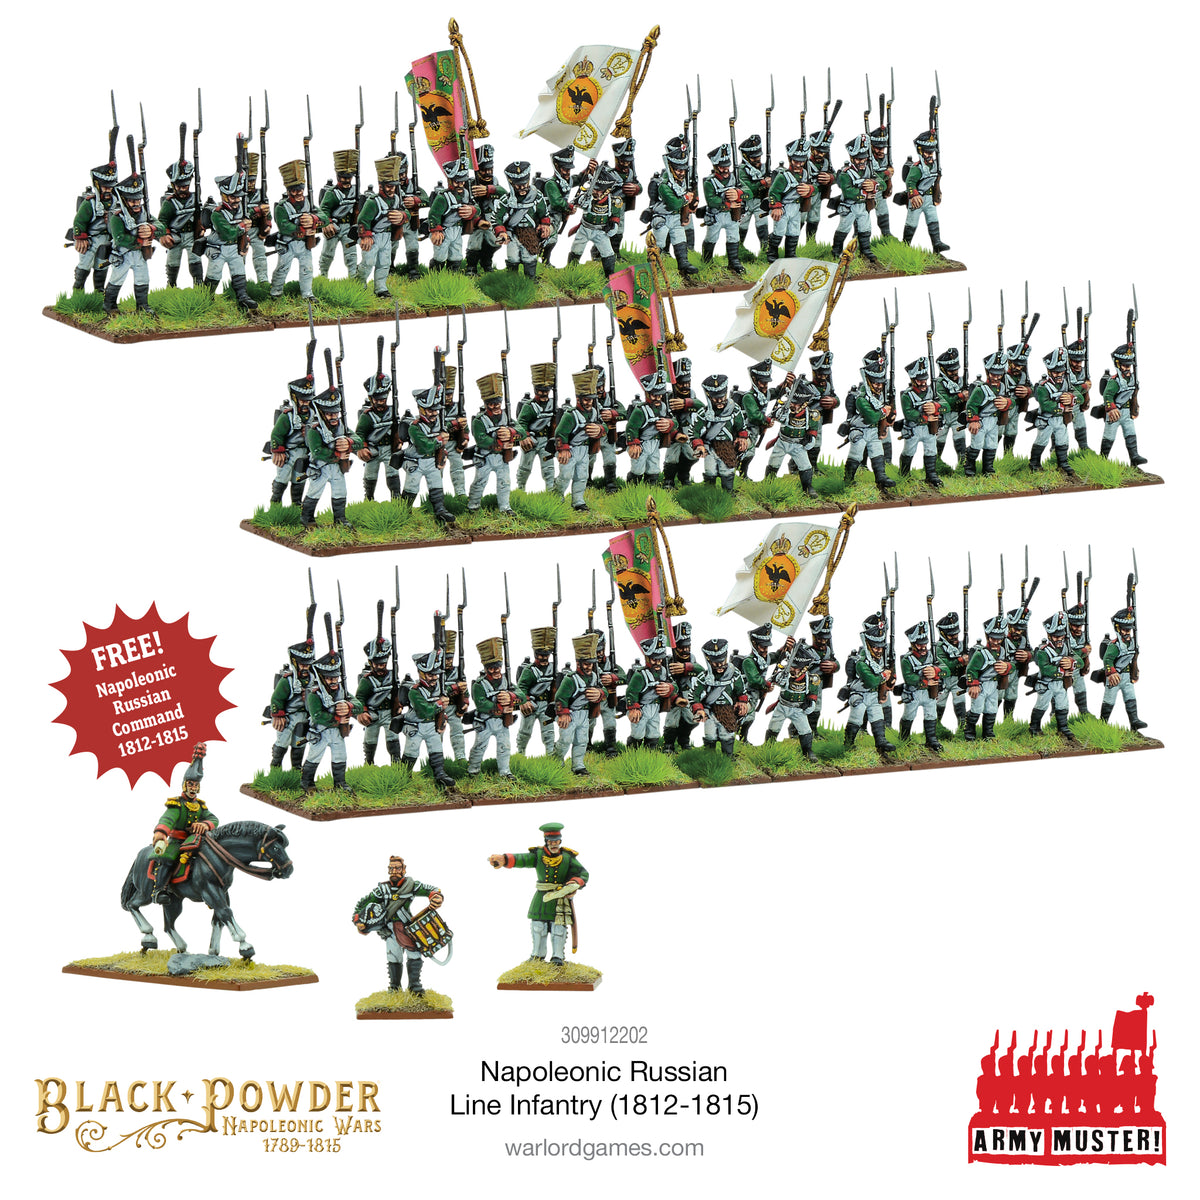 Army Muster: Napoleonic Russian Line Infantry (1812-1815)